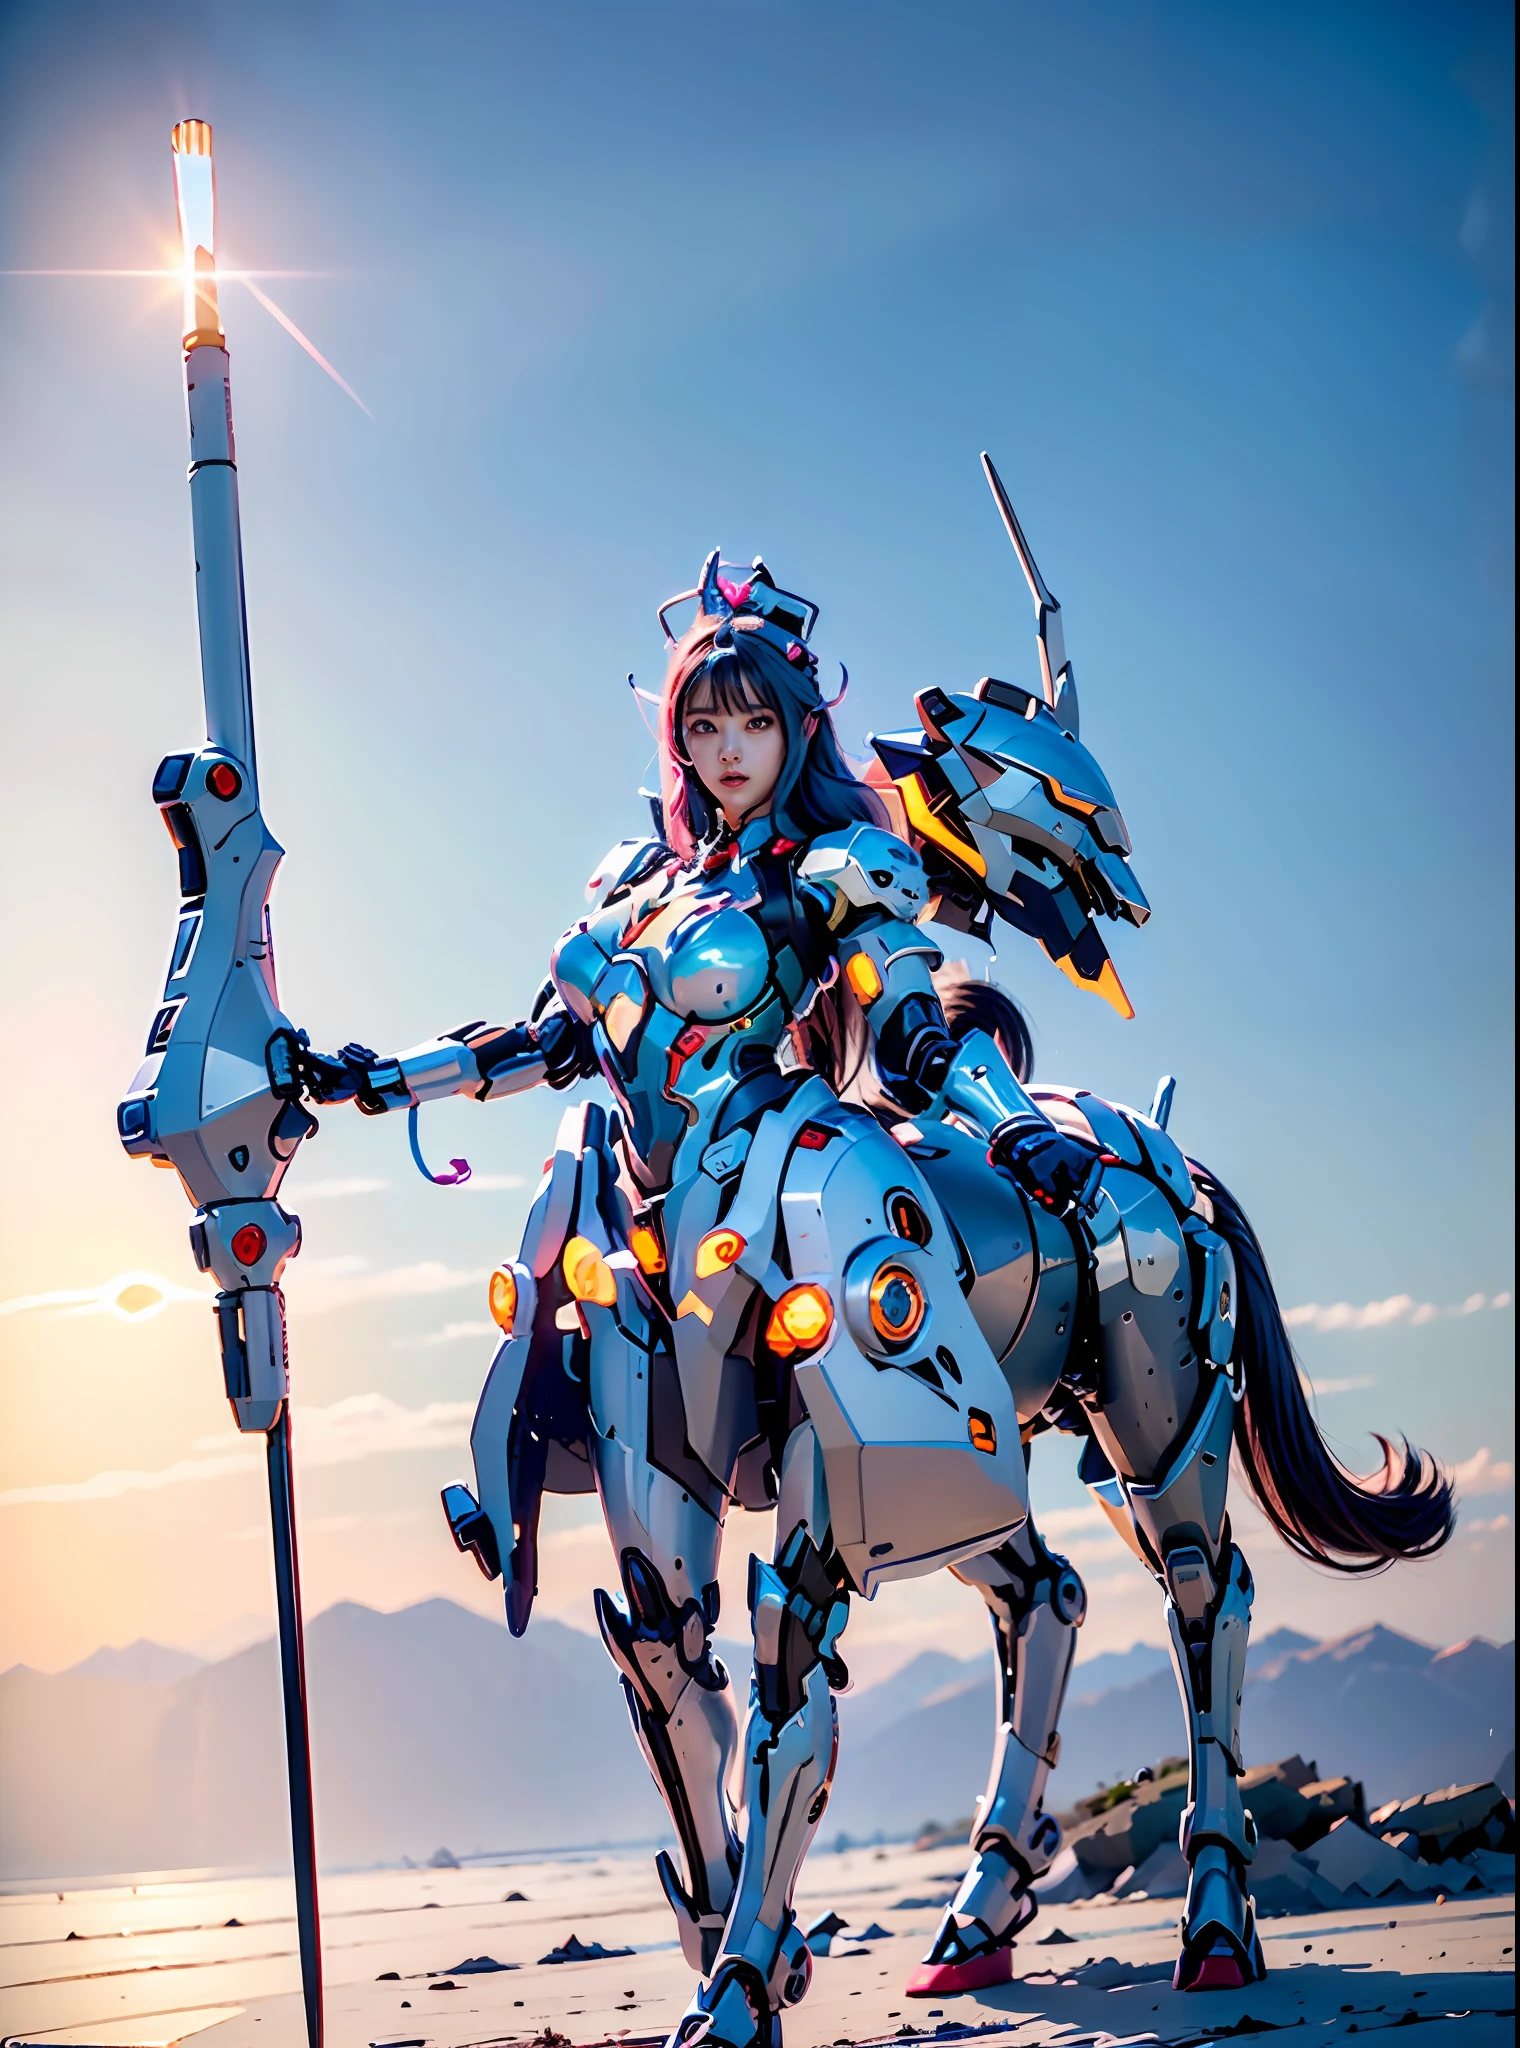 In the center of the ultra-wide-angle lens, the beautifully and ethereal mechanical centaur queen deploys her wings on the ionosphere to make a jump。The upper body of the Mechanical Centaur Empress is a sexy body with obvious feminine characteristics，The lower body is a mechanical part with a horse-like torso with streamlined sexy lines。Use Midjourney's advanced stroke tools and color palettes, as well as texture packs, model packs, texture tools，Concentration，Let the Mechanical Centaur Empress have harmonious moving lines，And the mechanical light wings of the mechanical Empress Satyr are plated with a unique space glow，The halo crown on the head of the mechanical centaur queen casts light casting neon，Let her be majestic，Add intricate textures and models to the Mechanical Centaur Empress, giving the real body soft and sexy lines and an authentic texture，Let the legs in the shape of horse legs be graceful and slender，Giving the Mechanical Centaur Empress a sexy and touching K-cup teardrop-shaped giant tit, the huge texture and real oil shine that exudes the restraints。With Midjourney's advanced brush tools and palettes and strokes, experiment with different models and materials to create a grand, epic look at your scene，Let the mechanical centaur queen be toned and elegant and ethereal，Clearly display the fallen enemy wreckage and the surface of the moon against the background of the starry sky。Use Midjourney's powerful tools，You can bring this magnificent and futuristic scene to life with incredible detail and beauty。 hdr，（Reality，Masterpiece quality，best qualtiy），，pureerosface_v1，ulzzang-6500-v1.1